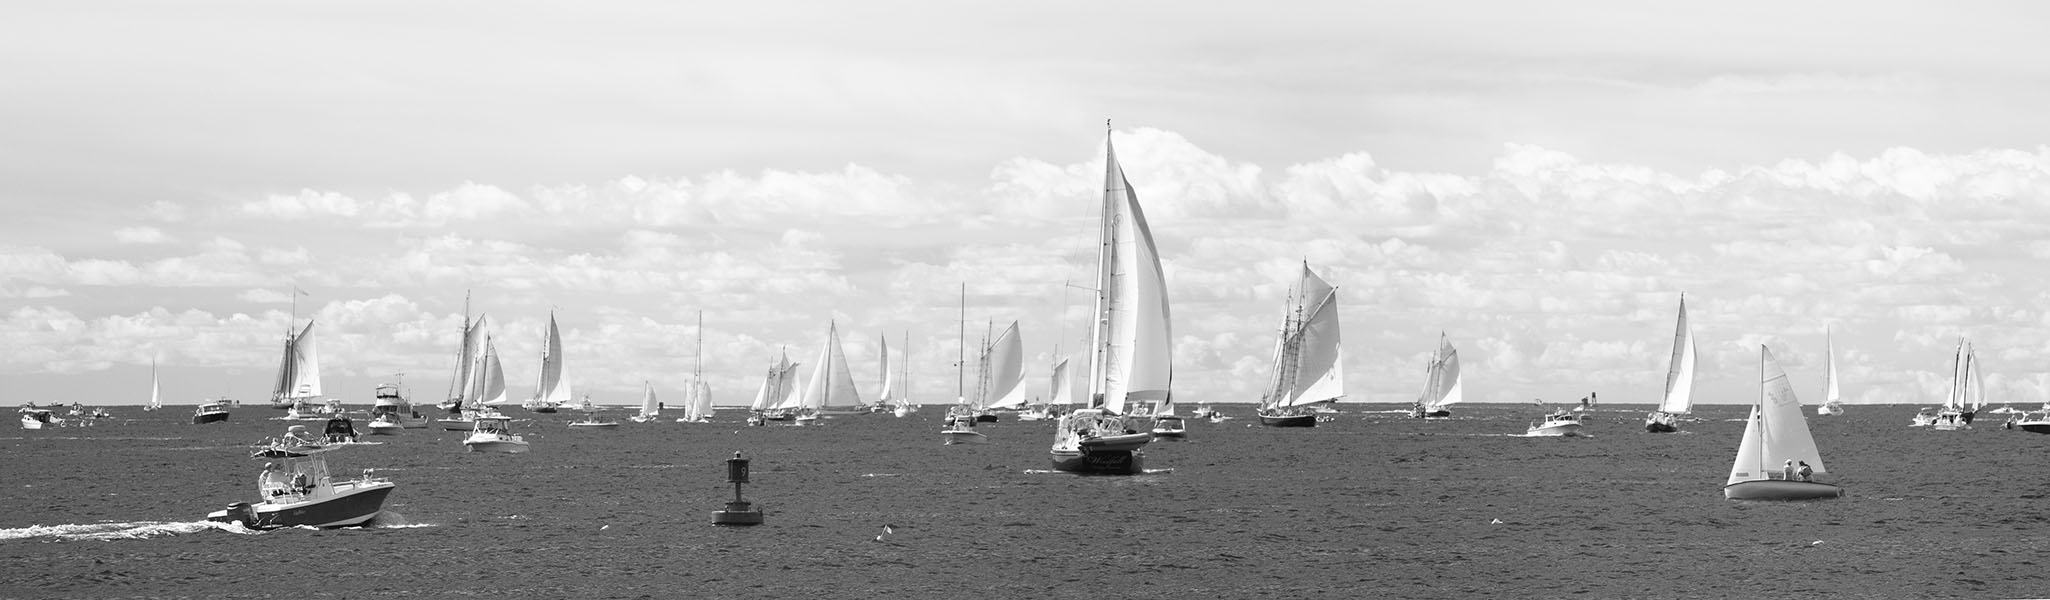 Infrared Panoramic Photo of Sailboots in Gloucester Harbor During the Schooner Festival, 2019.